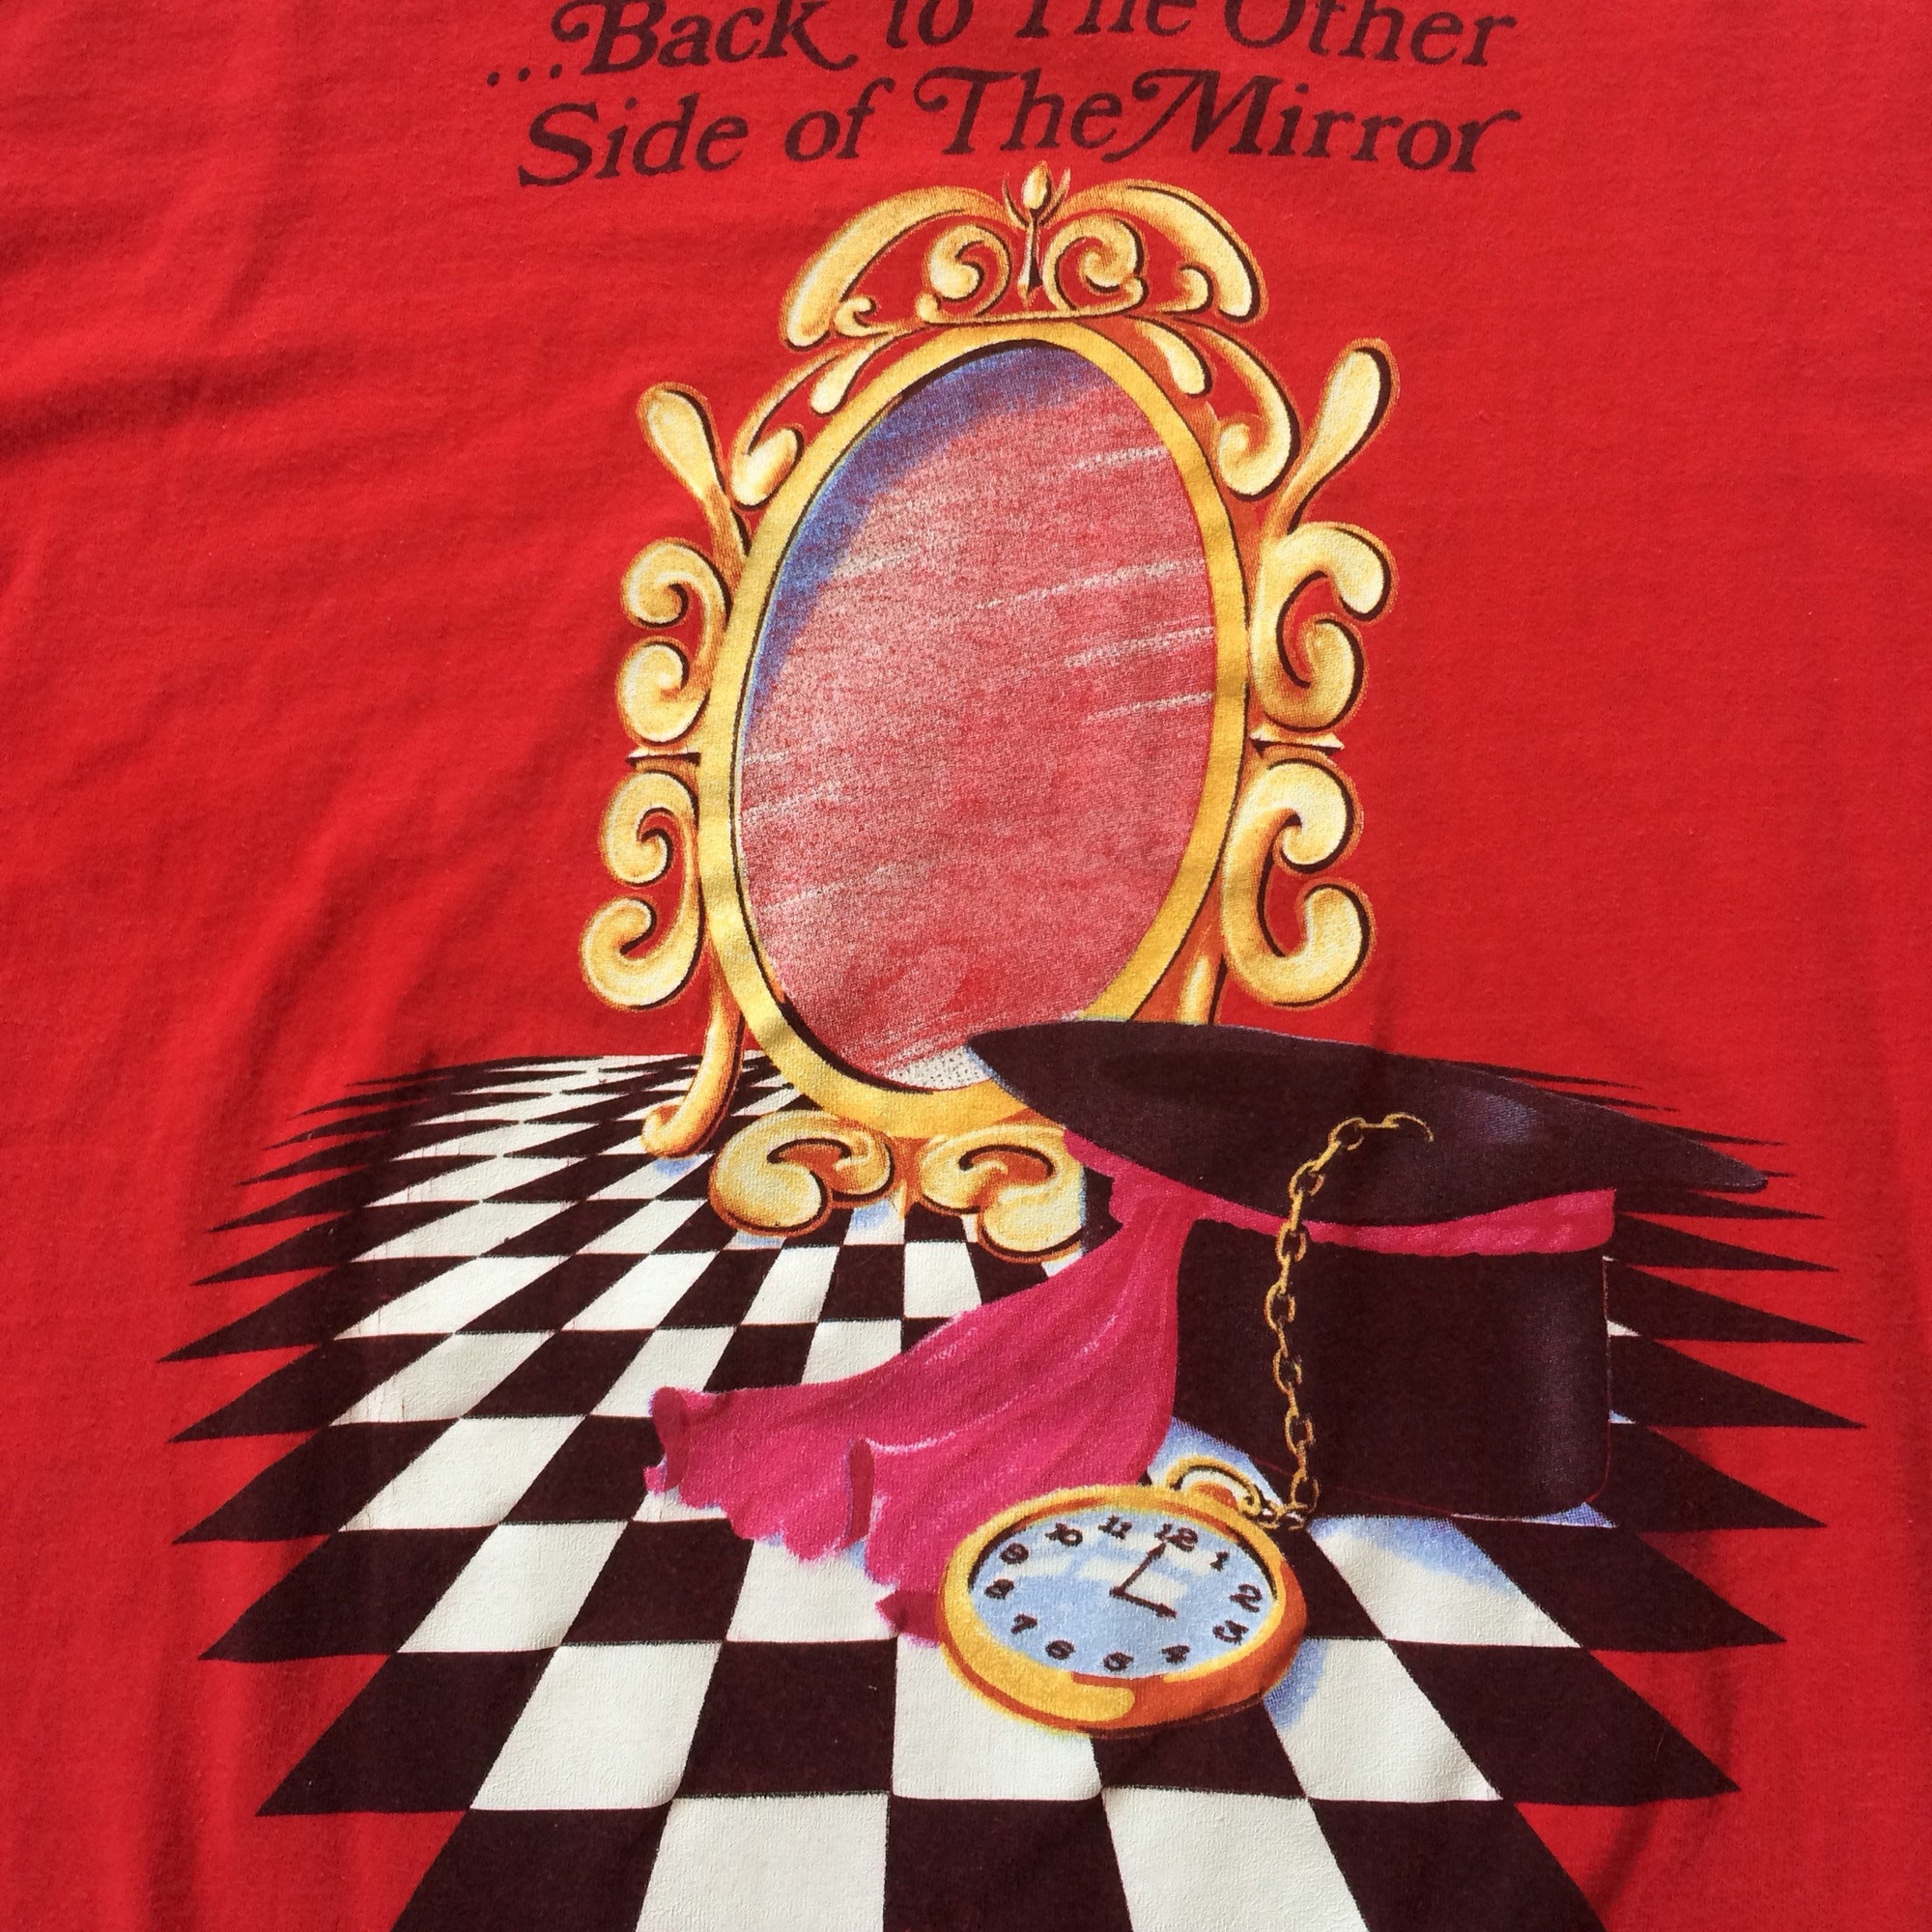 Vintage 80s Stevie Nicks Back to the Other Side of the Mirror Tour T-Shirt